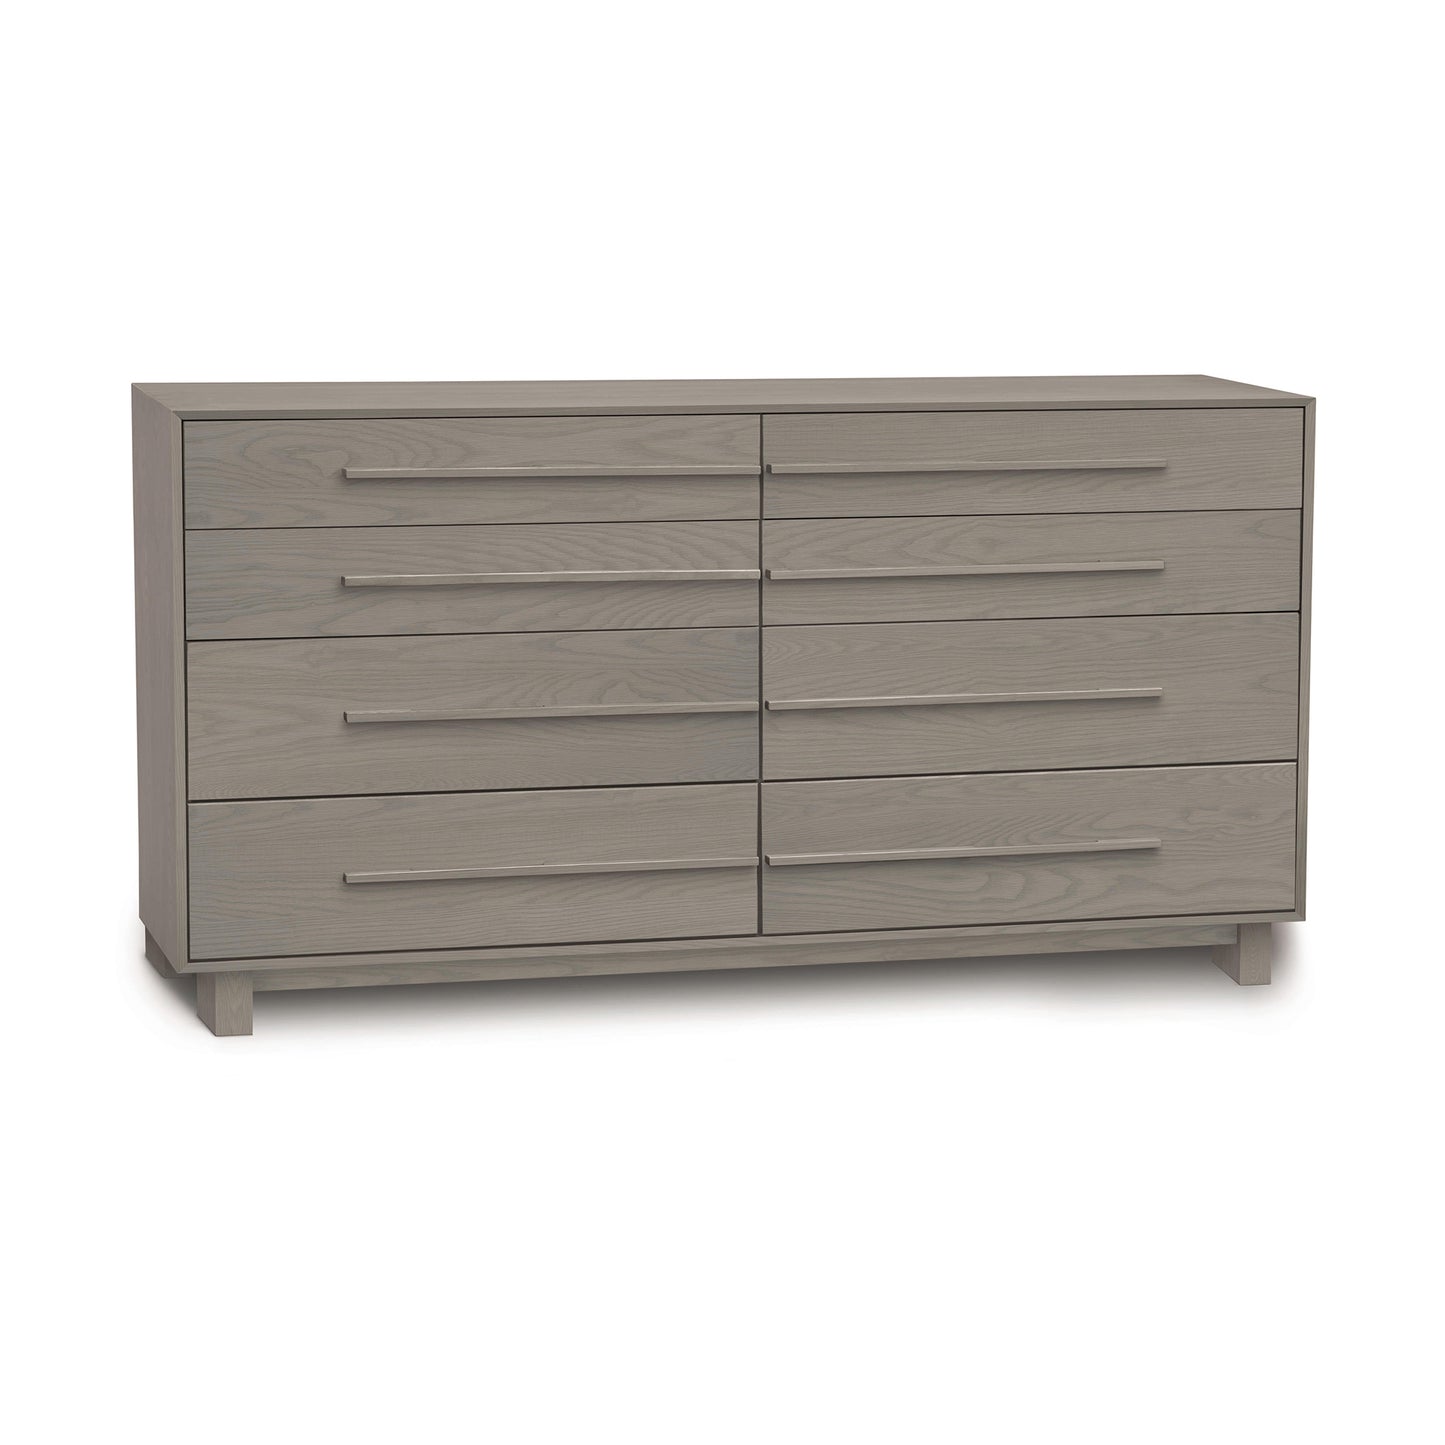 A modern Copeland Furniture Sloane 8-Drawer Dresser crafted from sustainably harvested wood, displayed on a white background.